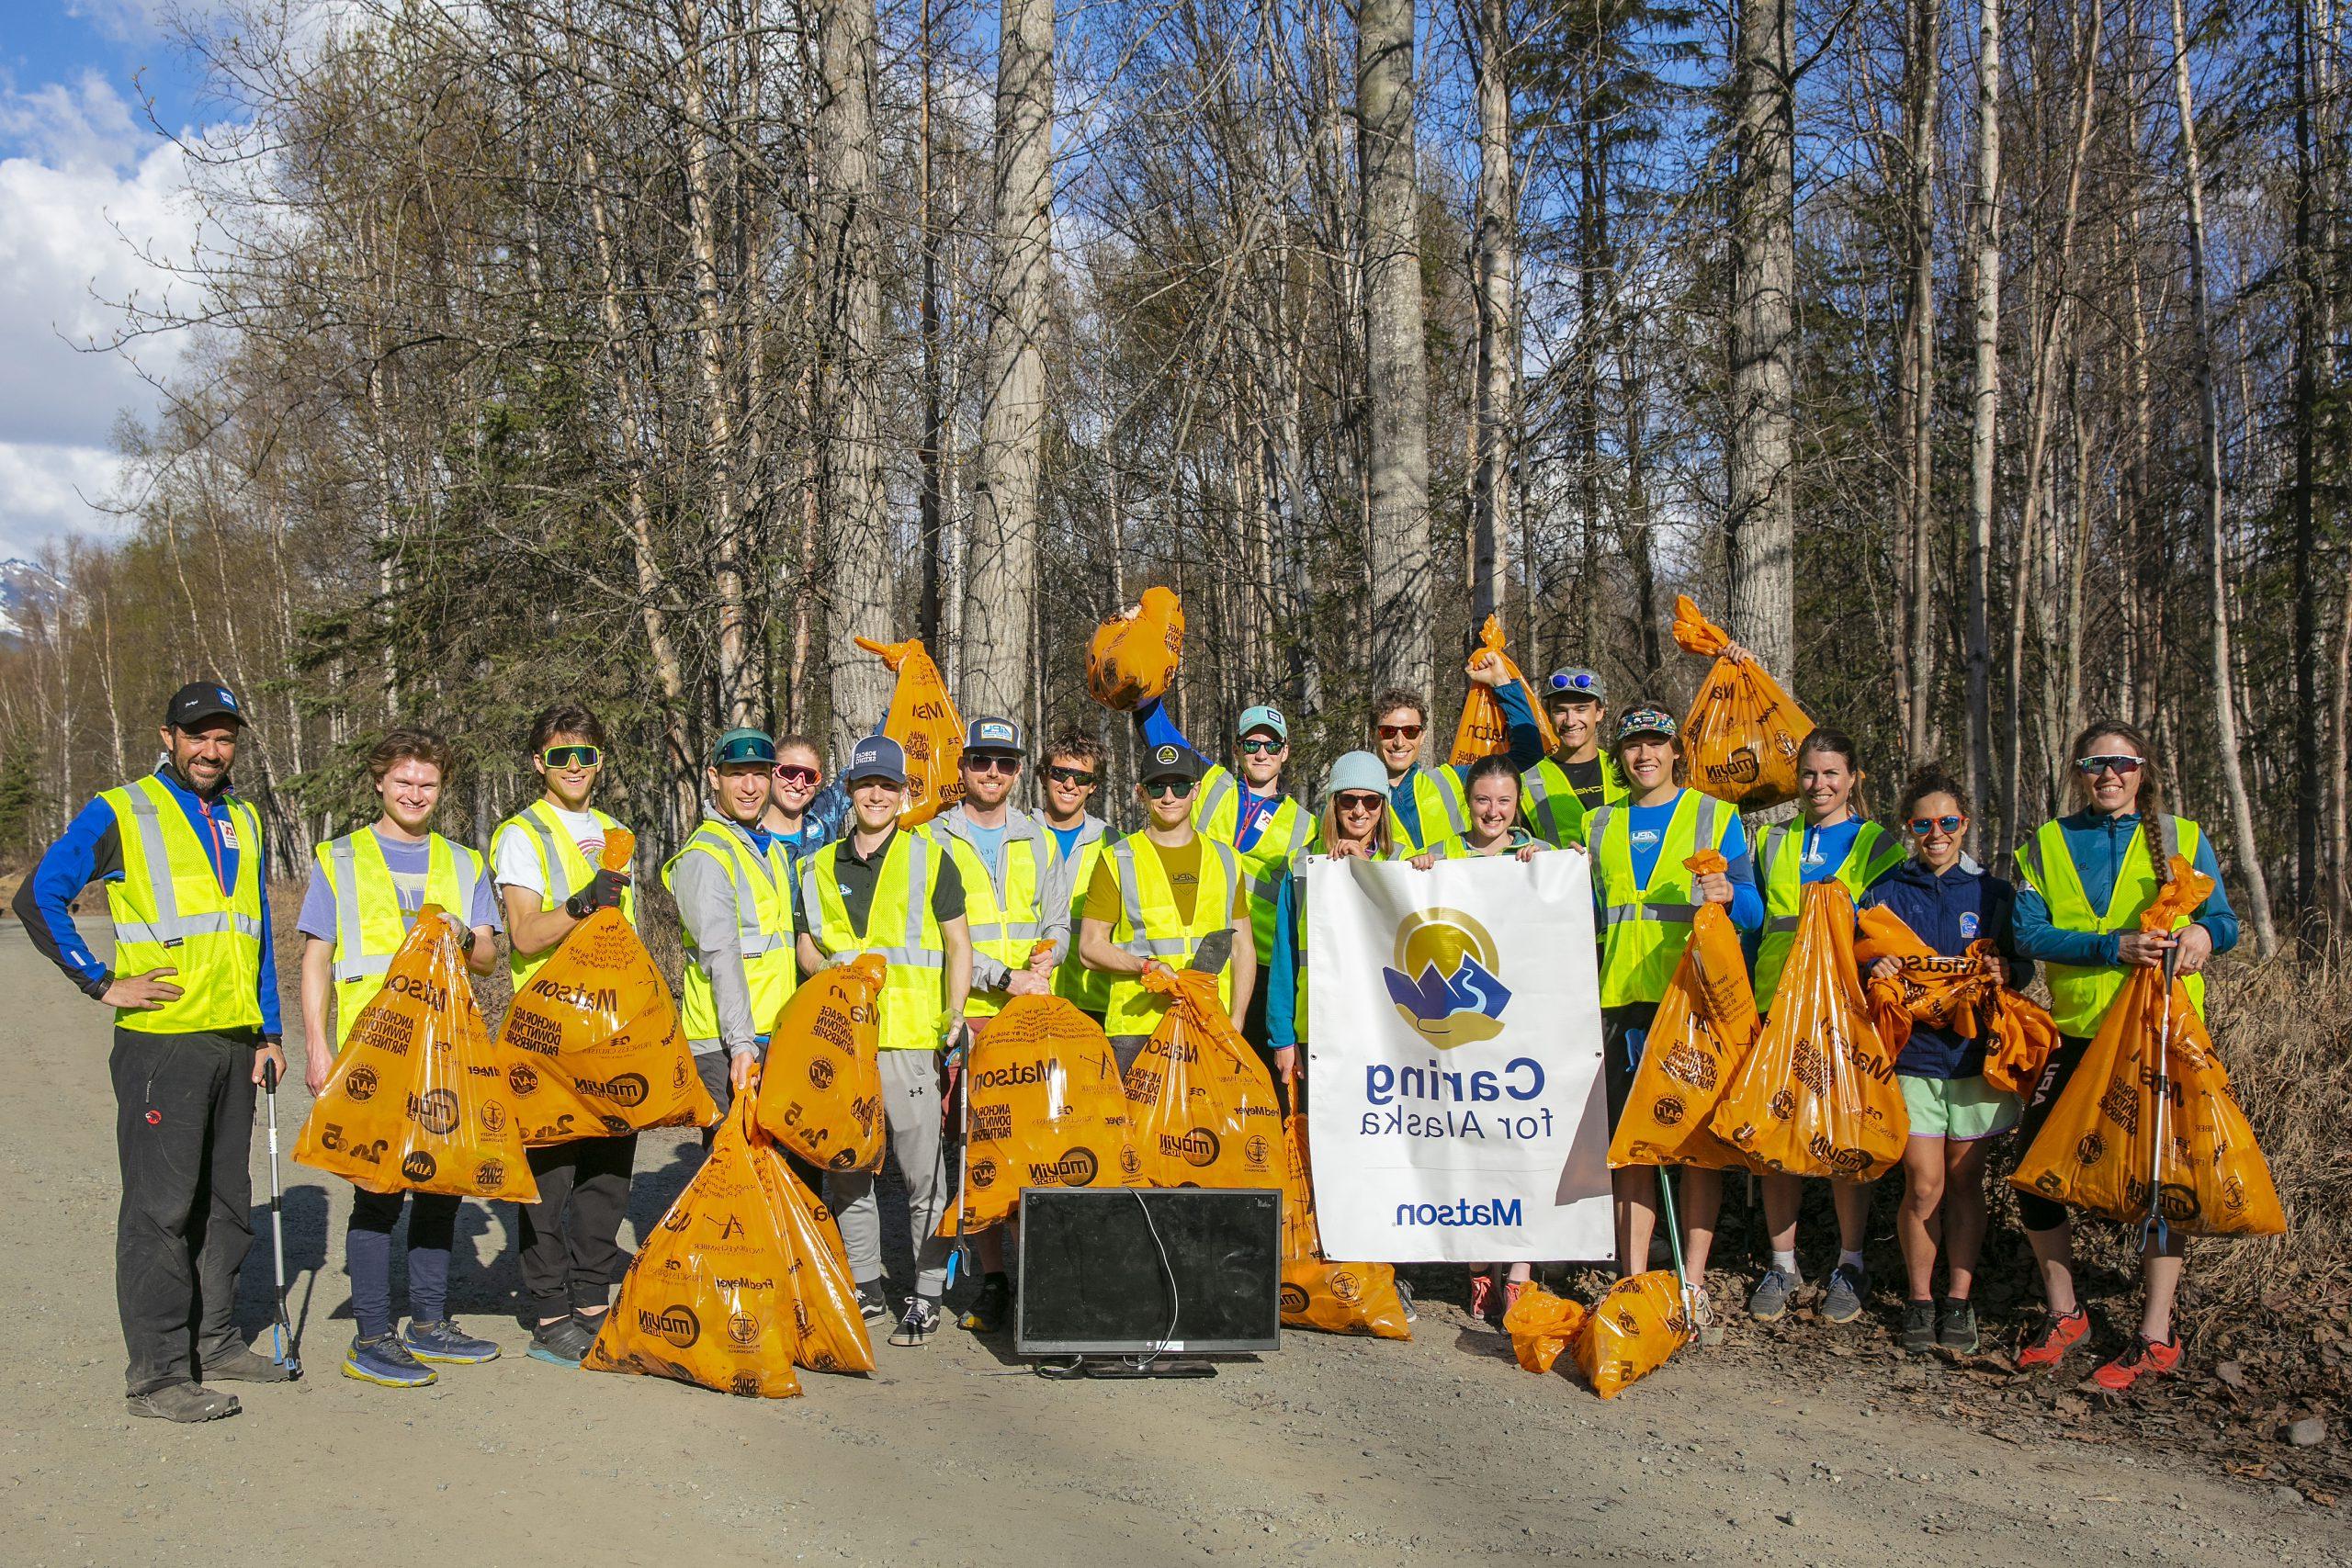 Volunteers wearing yellow safety vests pose for a group picture with their full orange trash bags and Caring For Alaska banner.